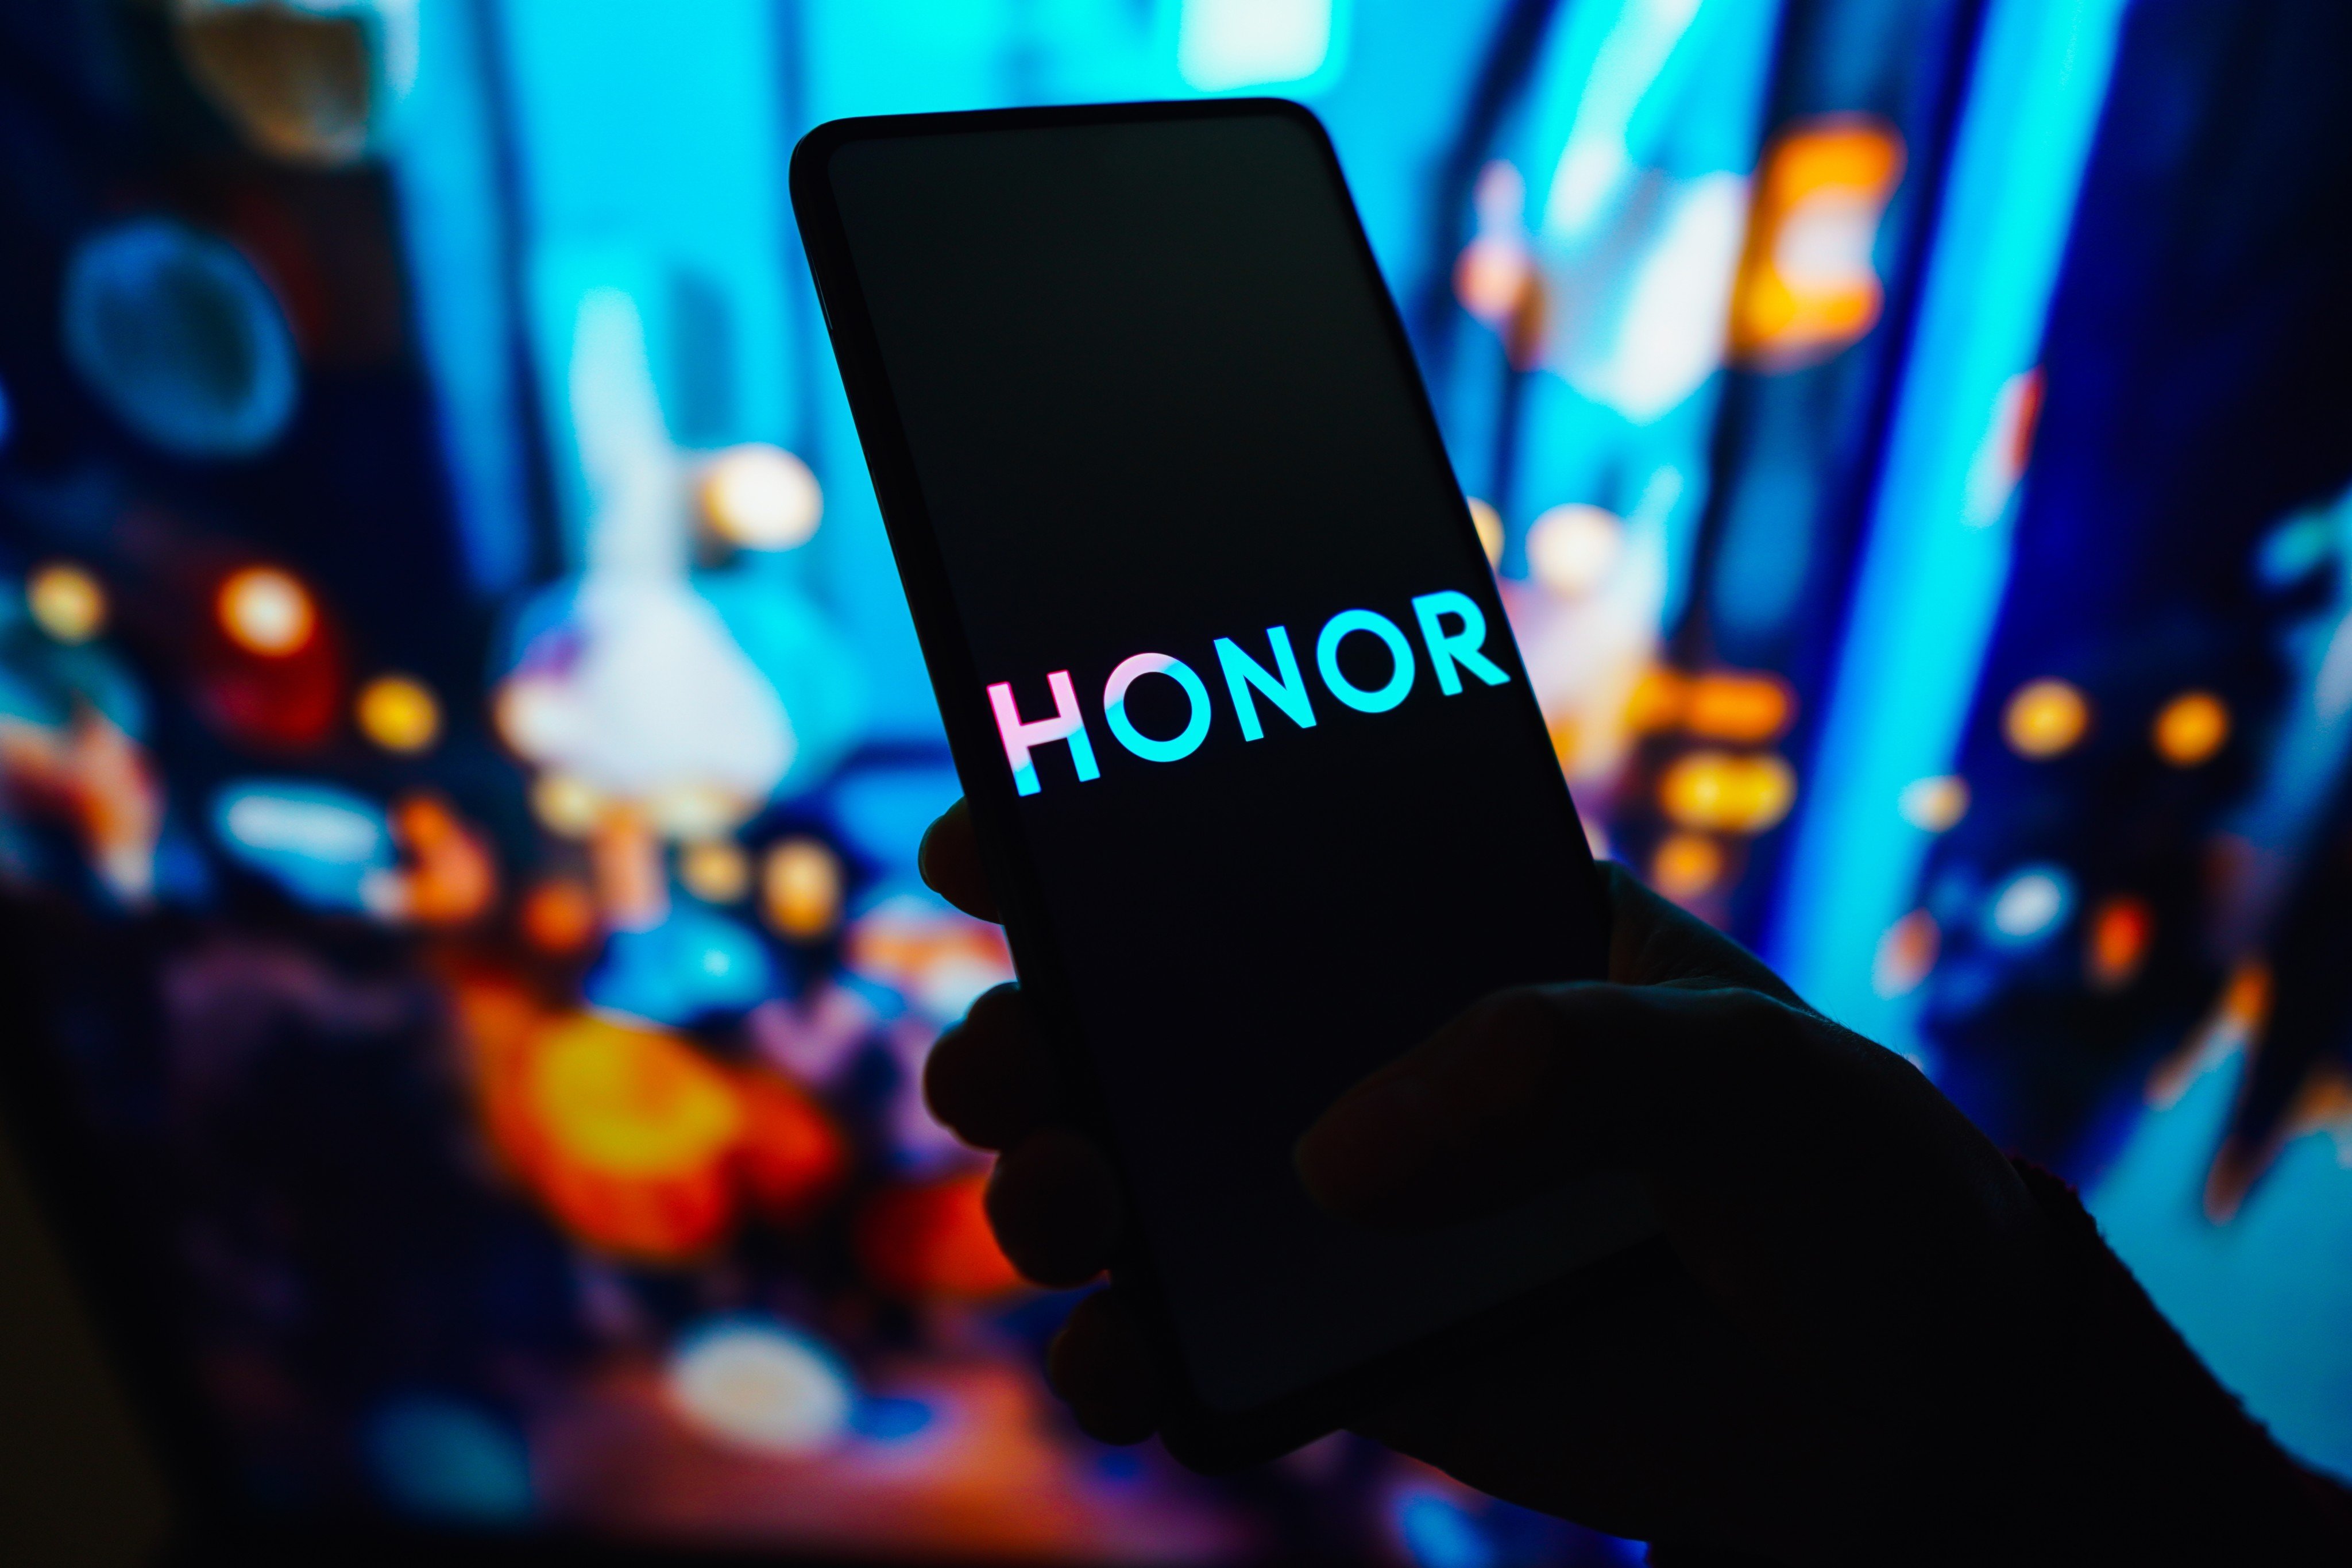 Honor chief executive George Zhao Ming said suppliers MediaTek and Qualcomm provide the “best chip solutions” for the company’s products. Photo: Shutterstock